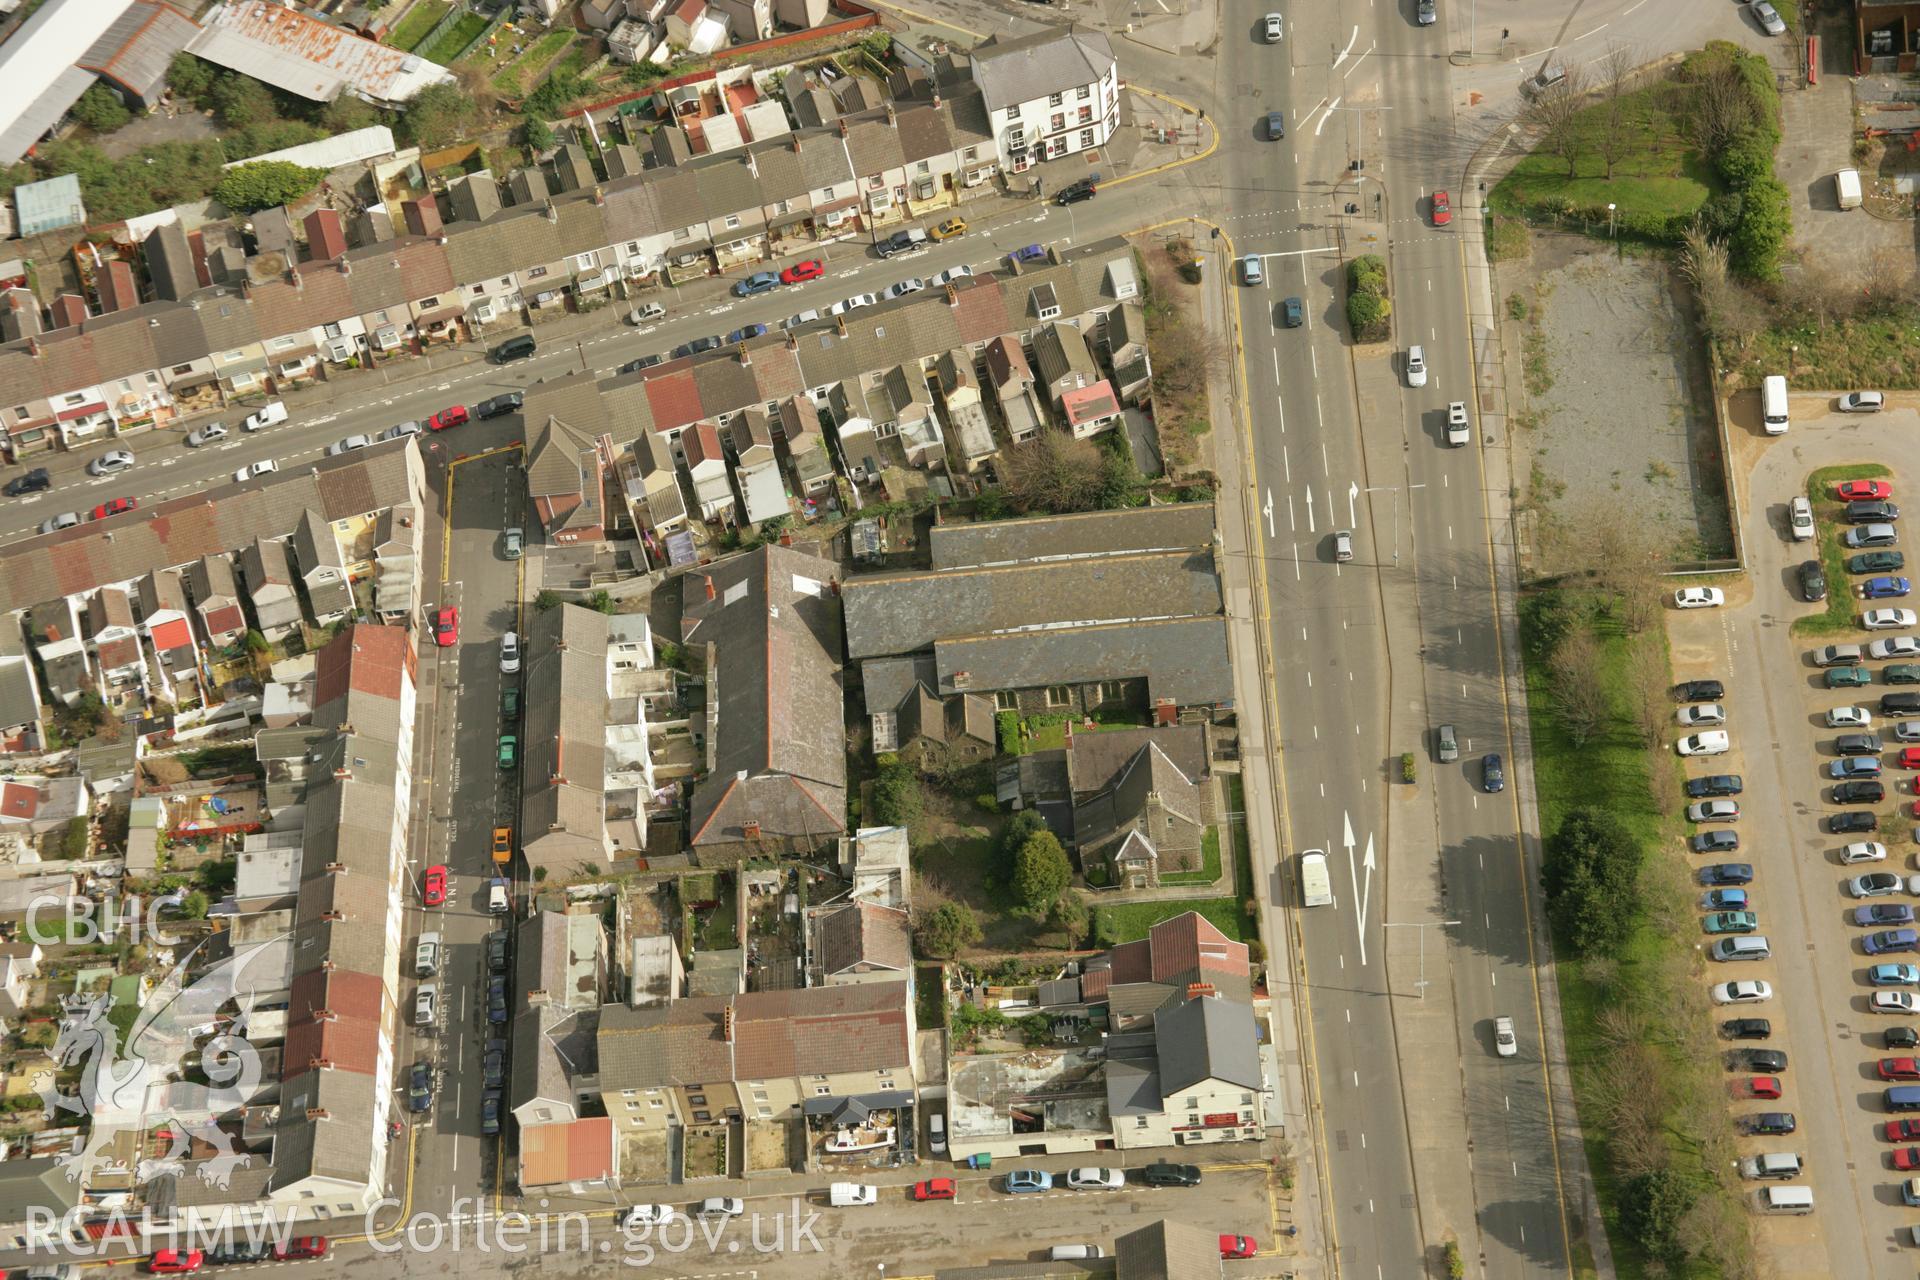 RCAHMW colour oblique aerial photograph of Christchurch (Garrison Church of Swansea), Oystermouth Road. Taken on 16 March 2007 by Toby Driver